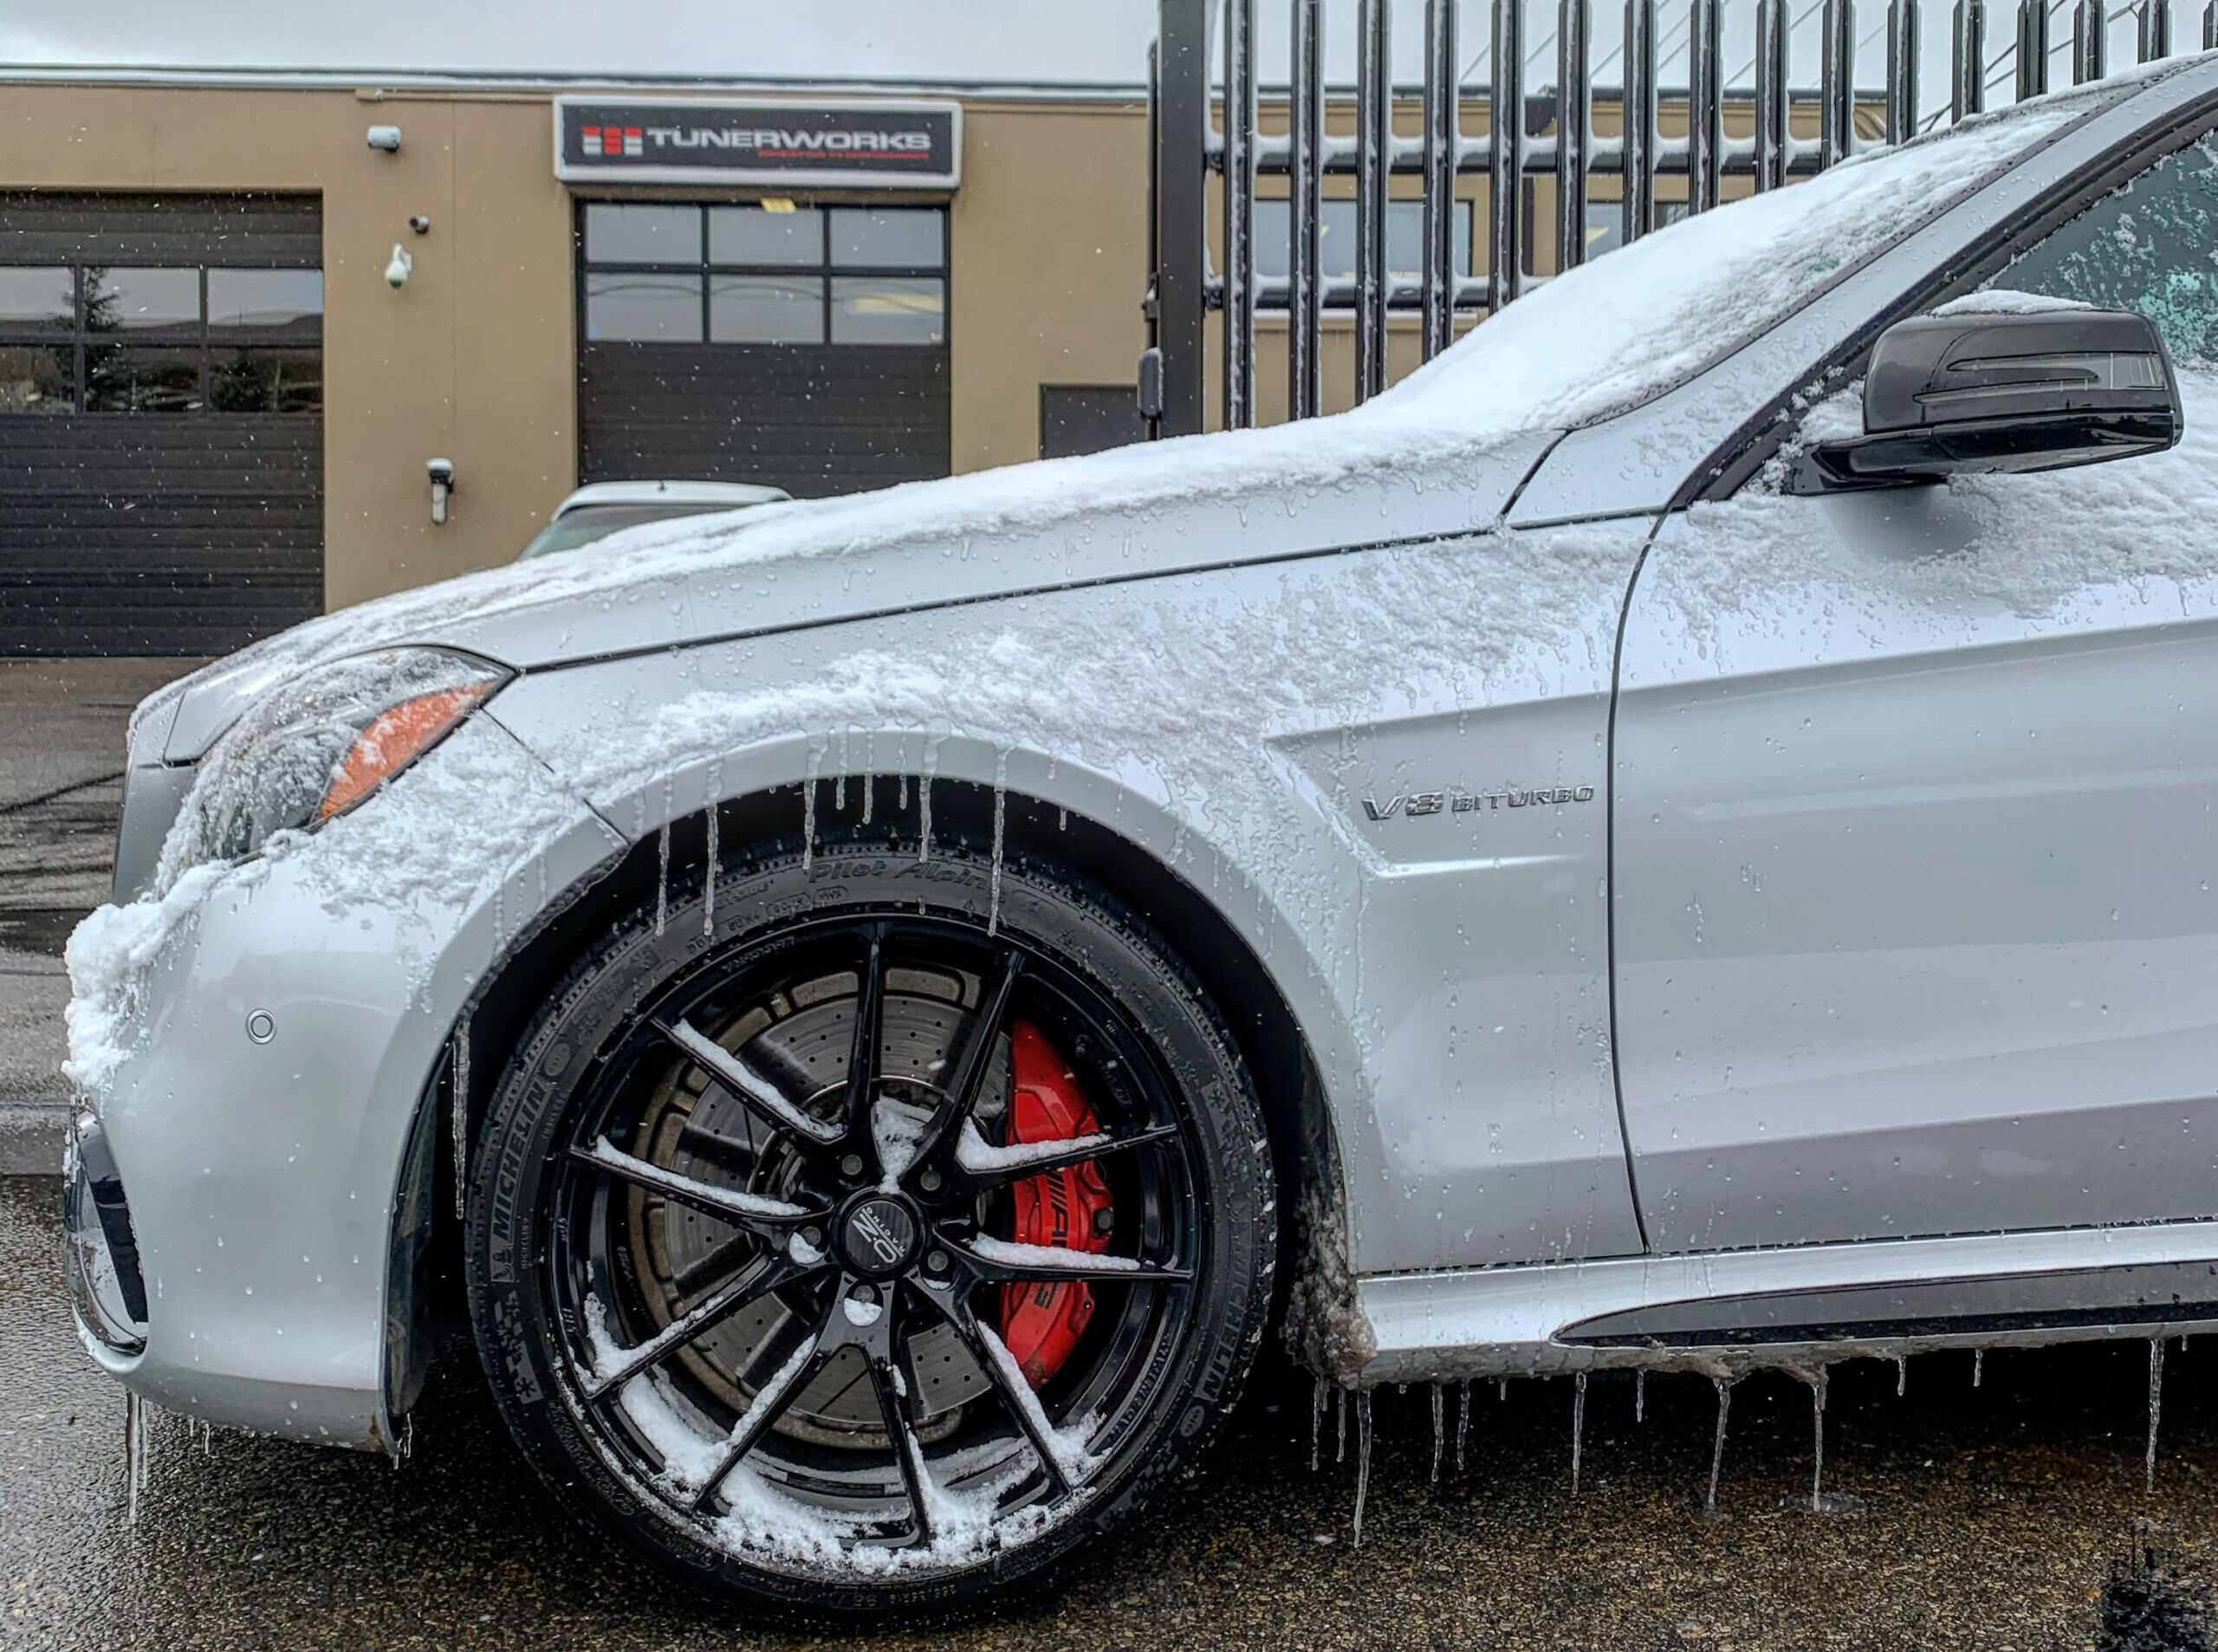 Mercedes Winter Tires And Wheels Specialist In Calgary 1